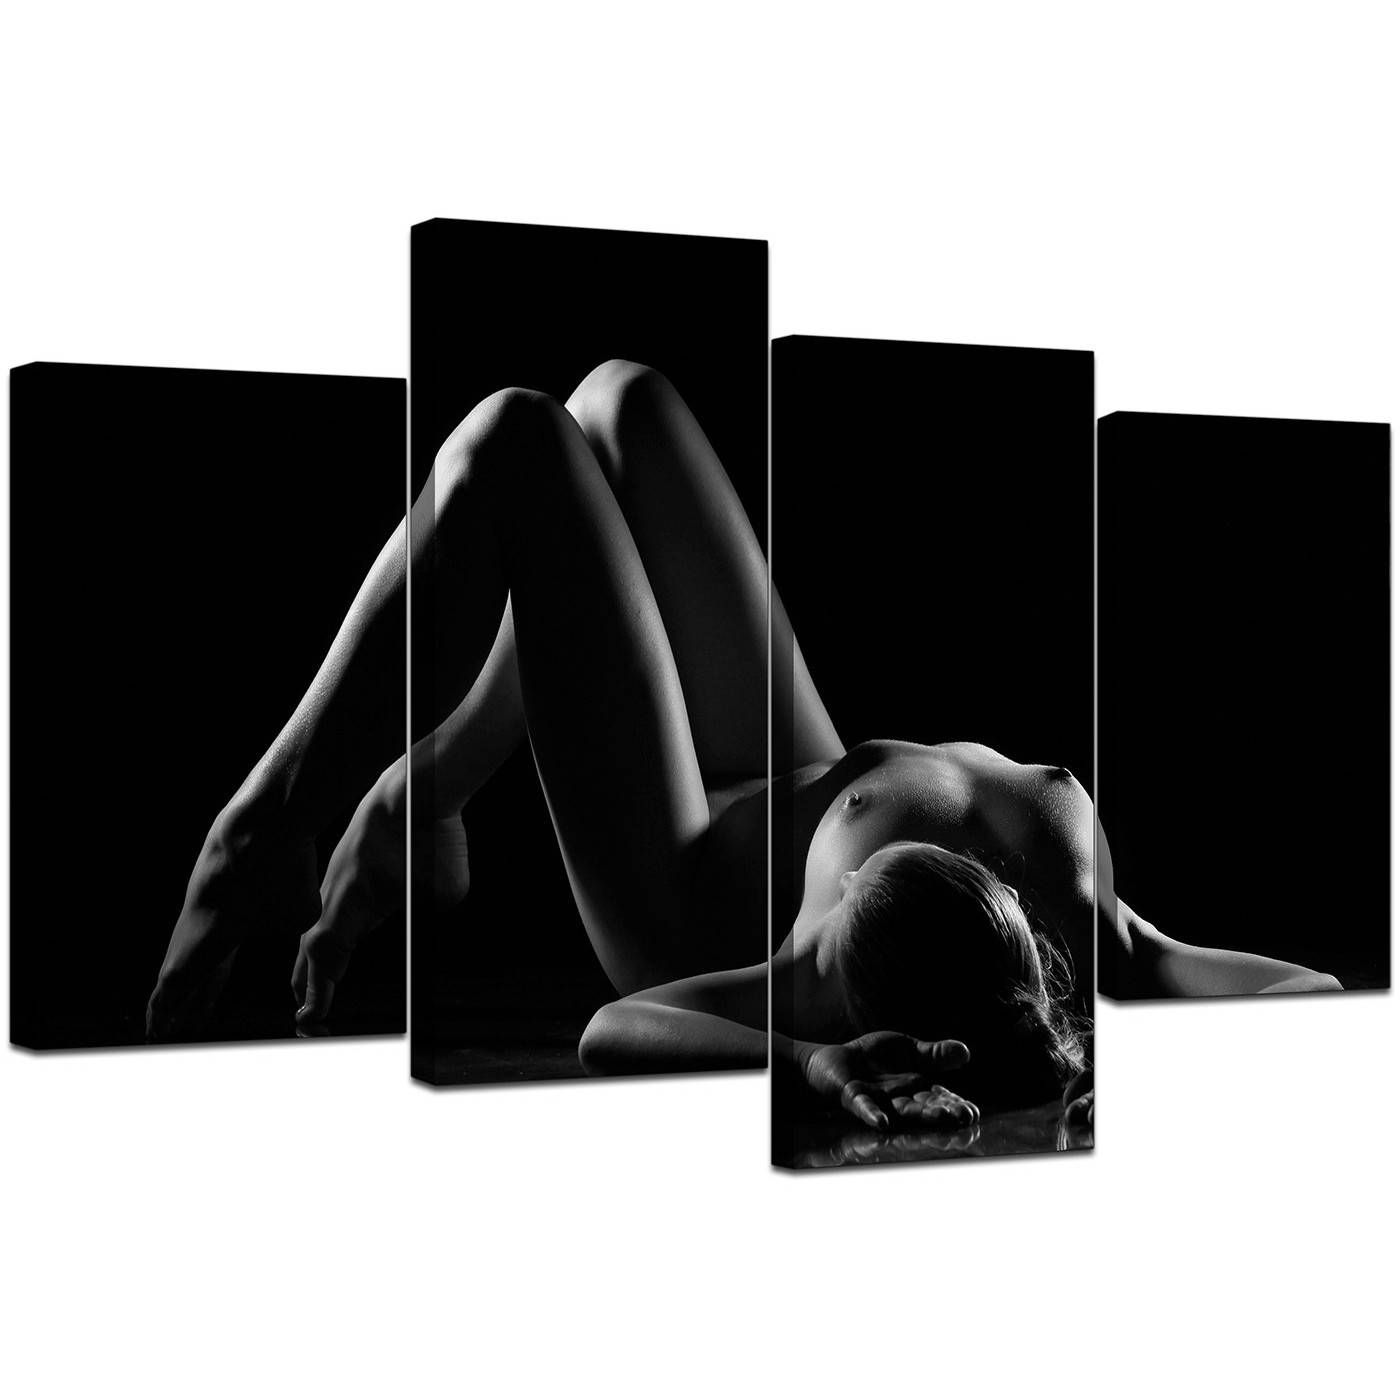 Sensual Canvas Art In Black & White For Your Bedroom In Most Recent Black And White Wall Art (View 3 of 16)